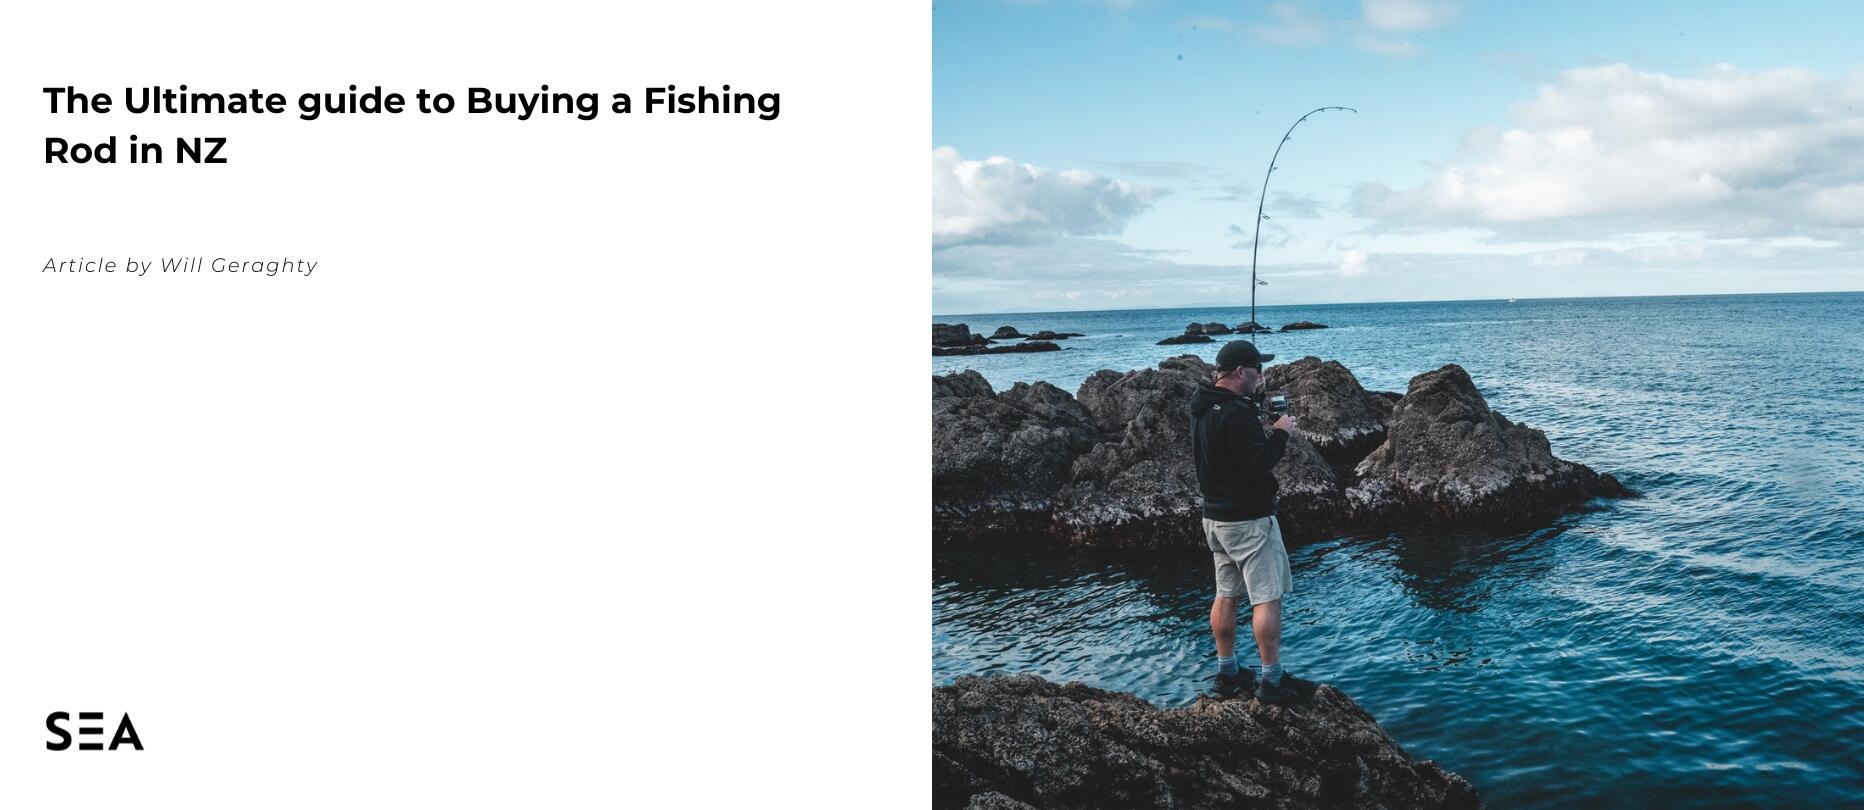 The Ultimate Guide To Buying A Fishing Rod In NZ